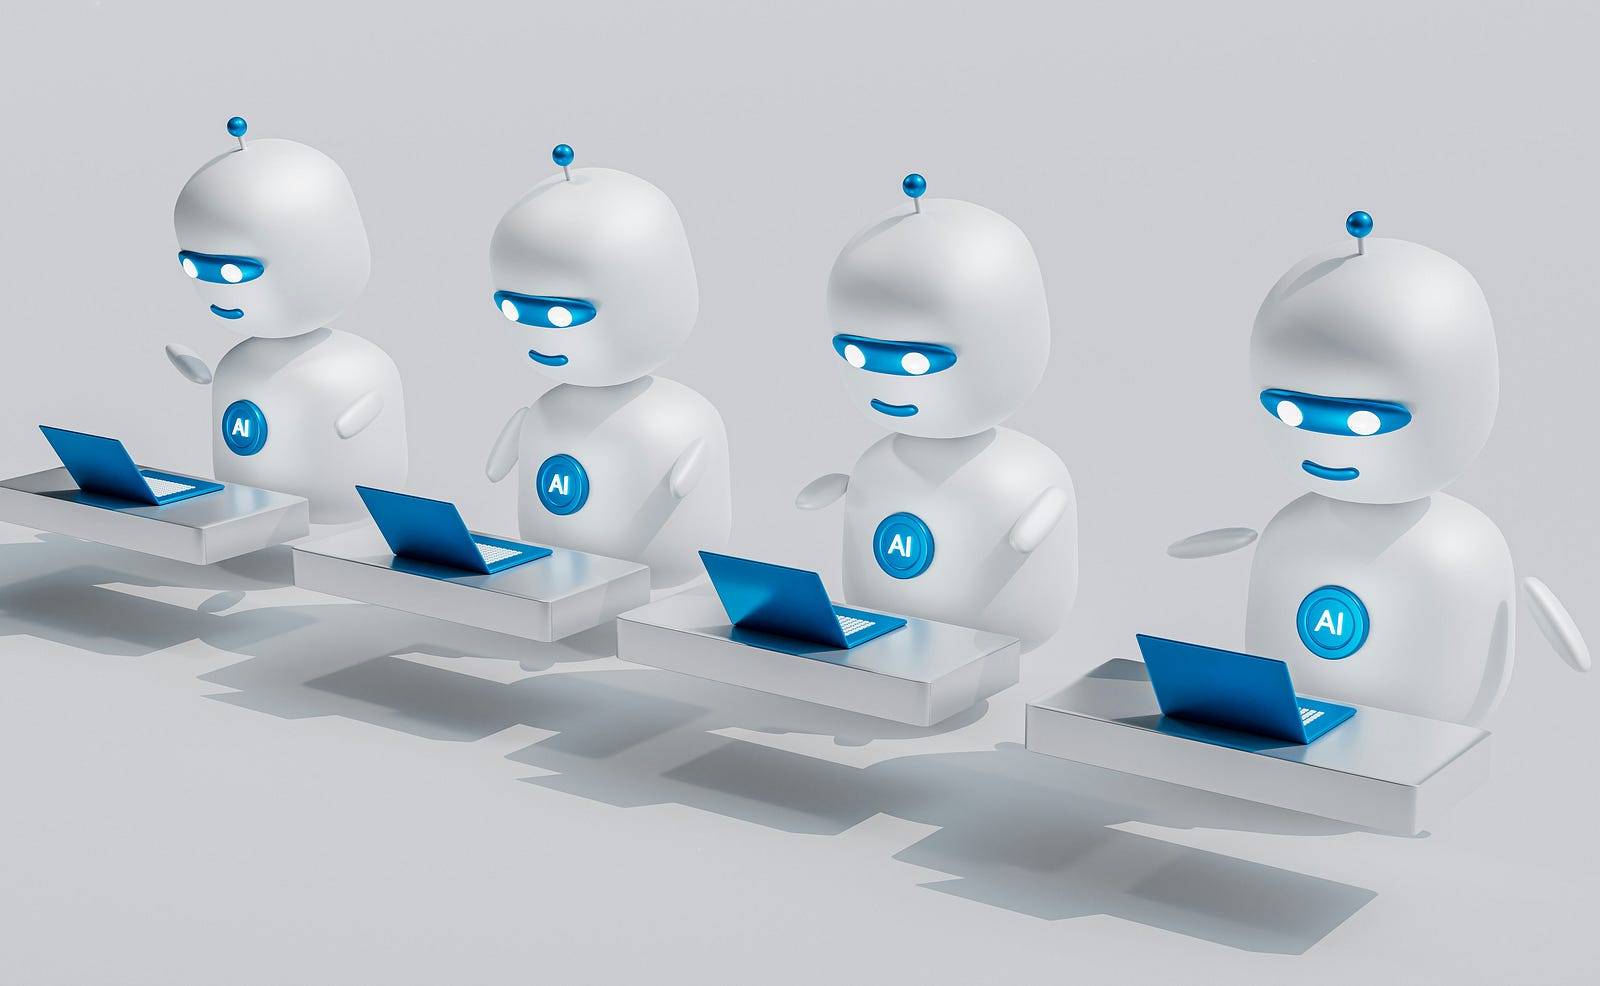 Four cartoon white and blue robotic machines type numbers into portable computers.